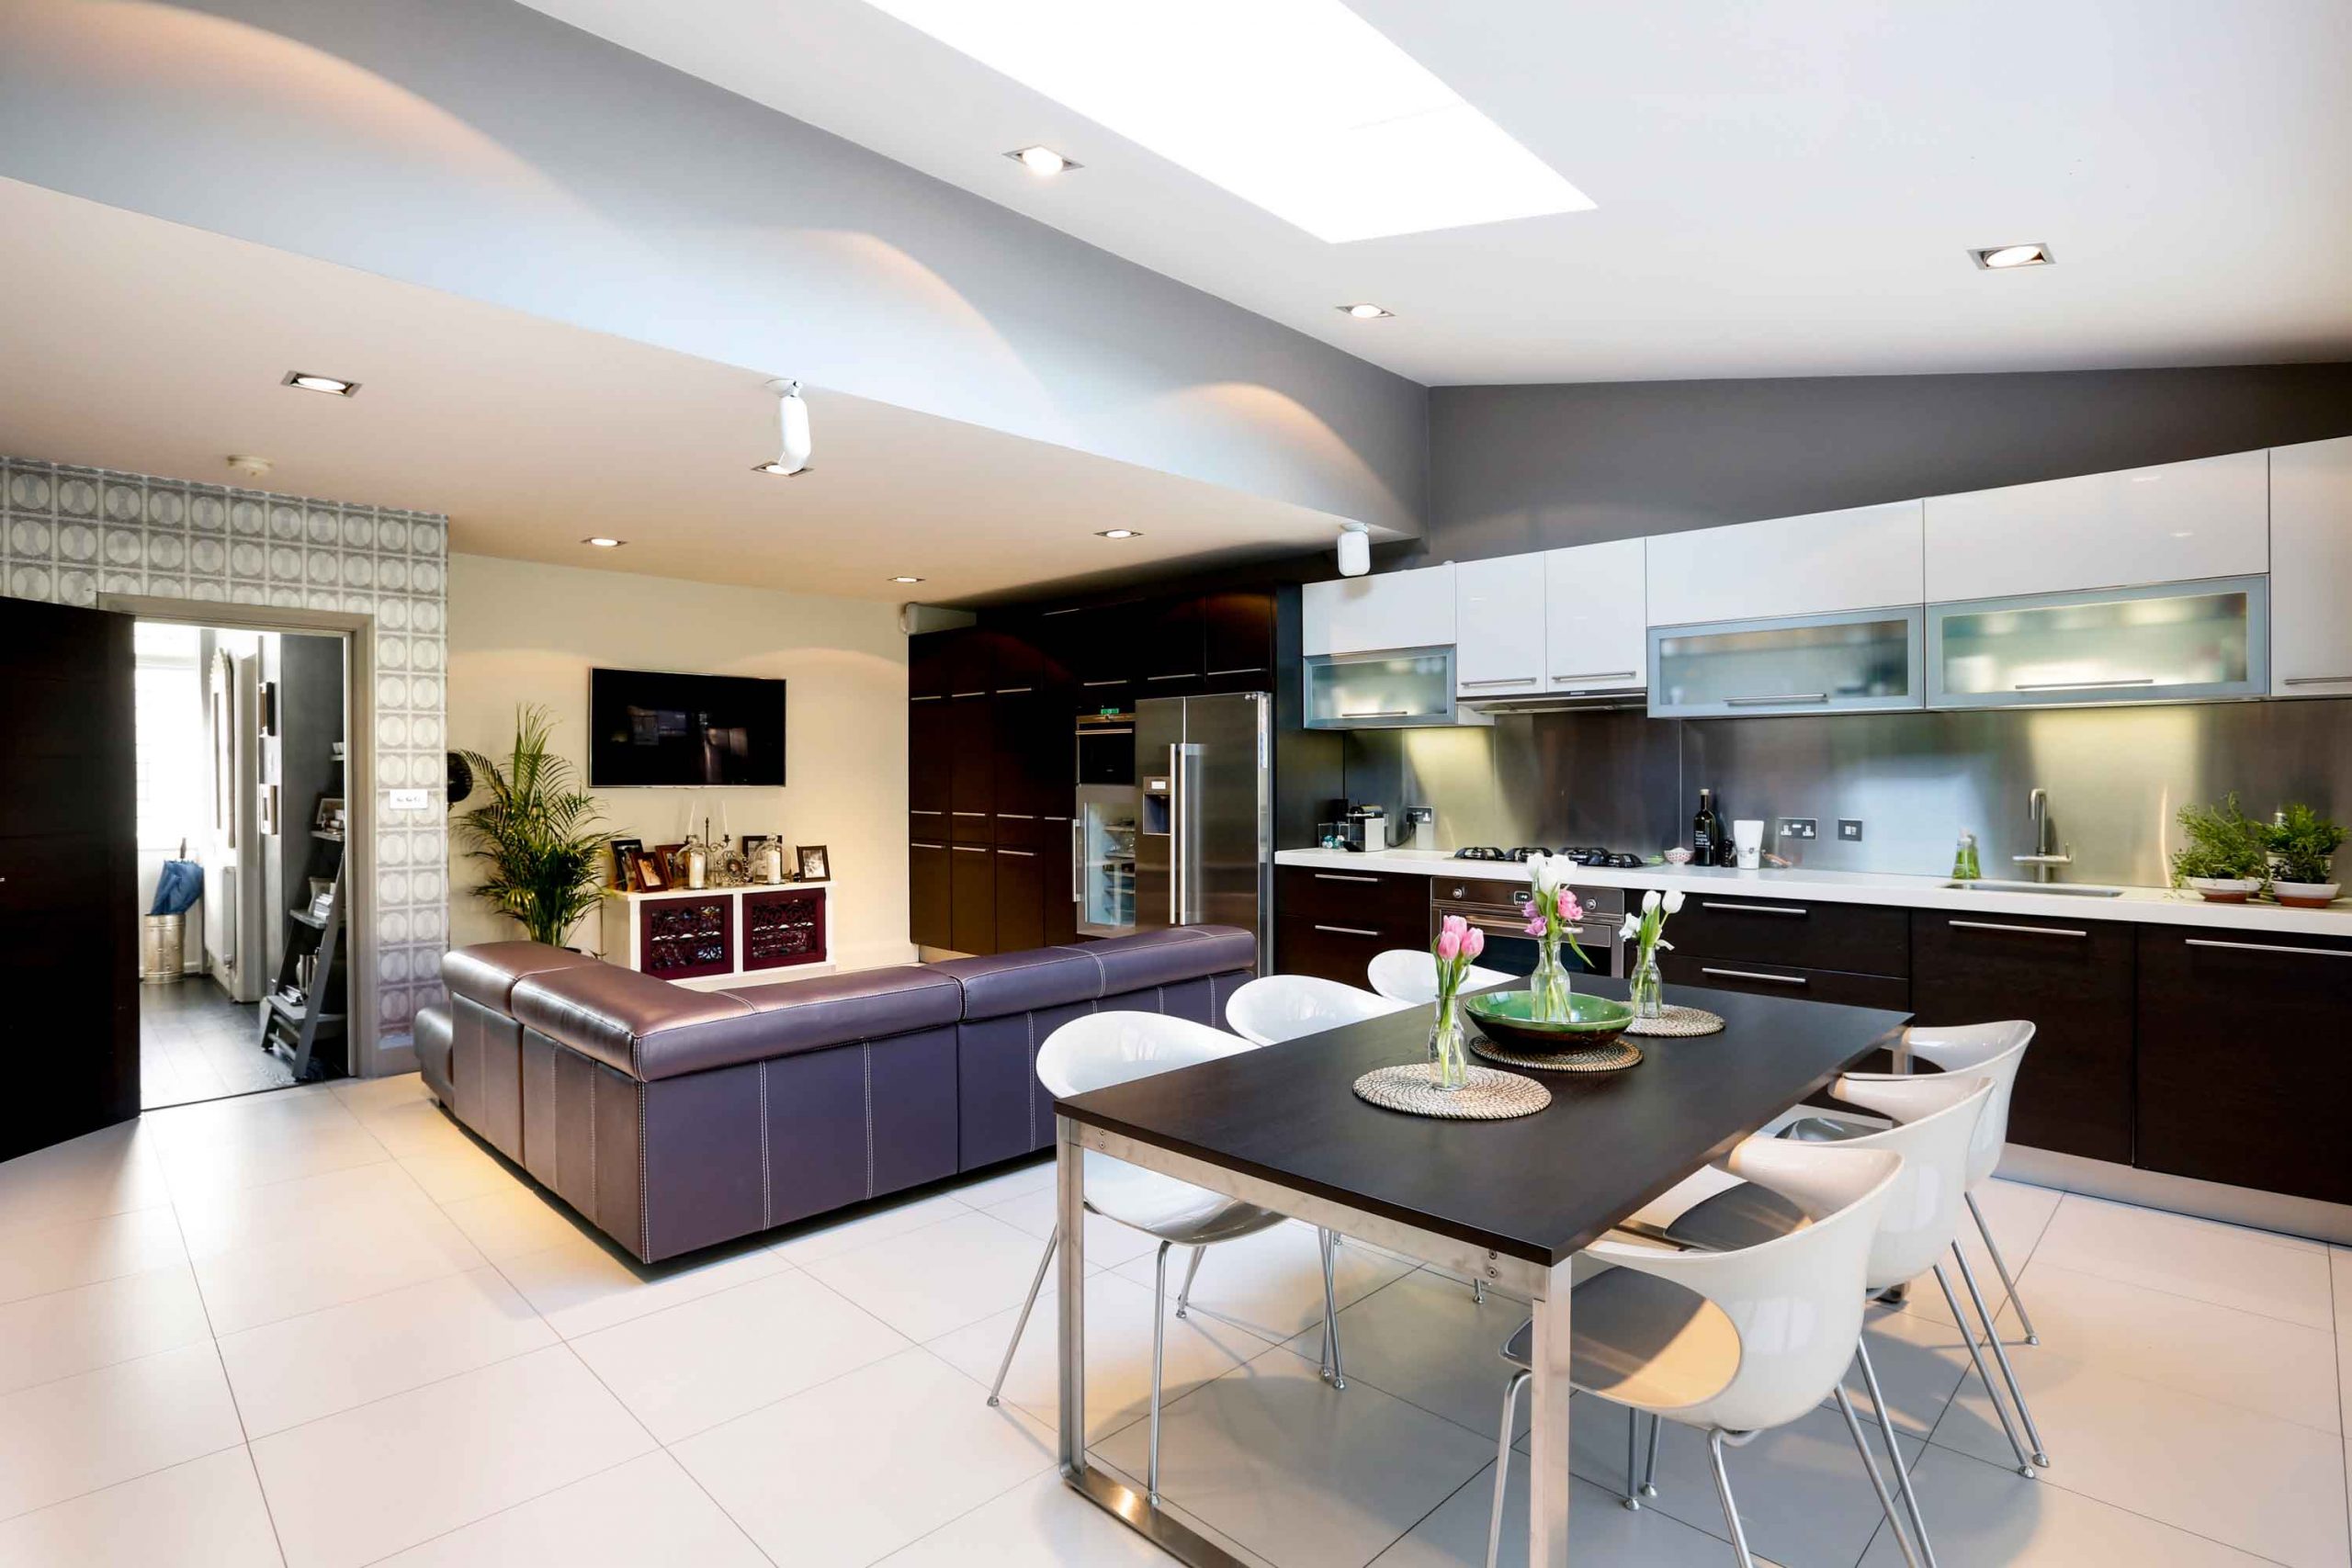 The benefits of visiting our kitchen showroom